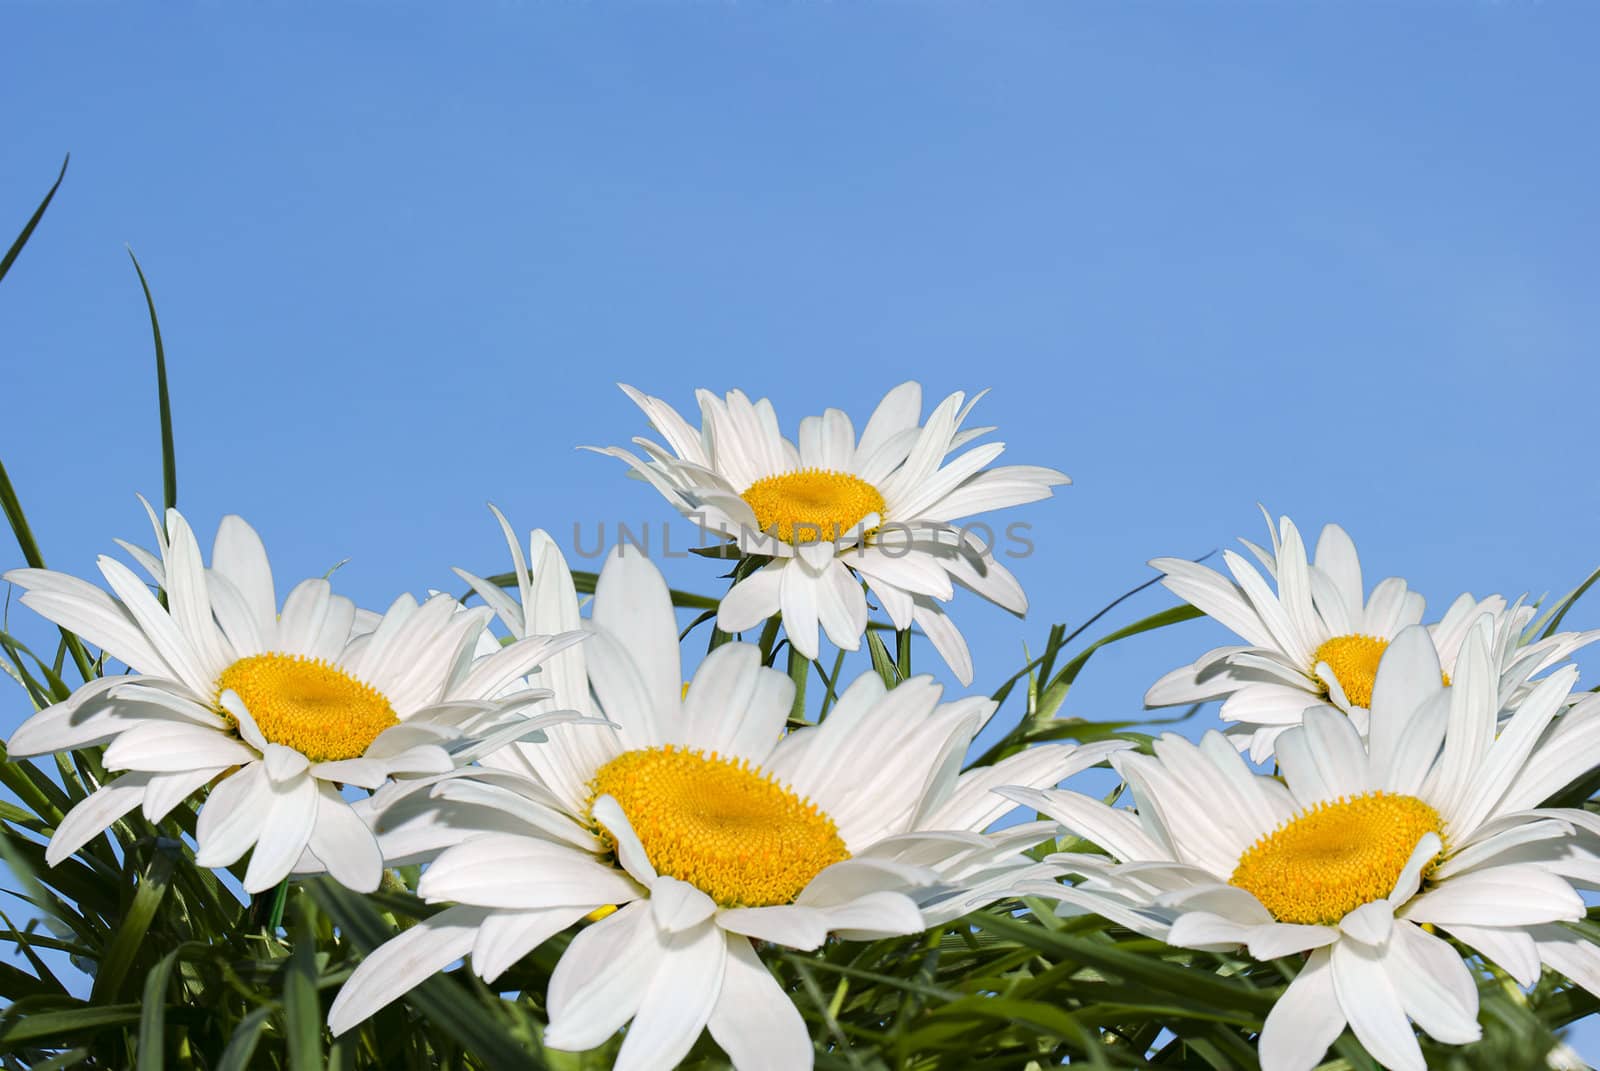 White camomile over green grass under the blue sky